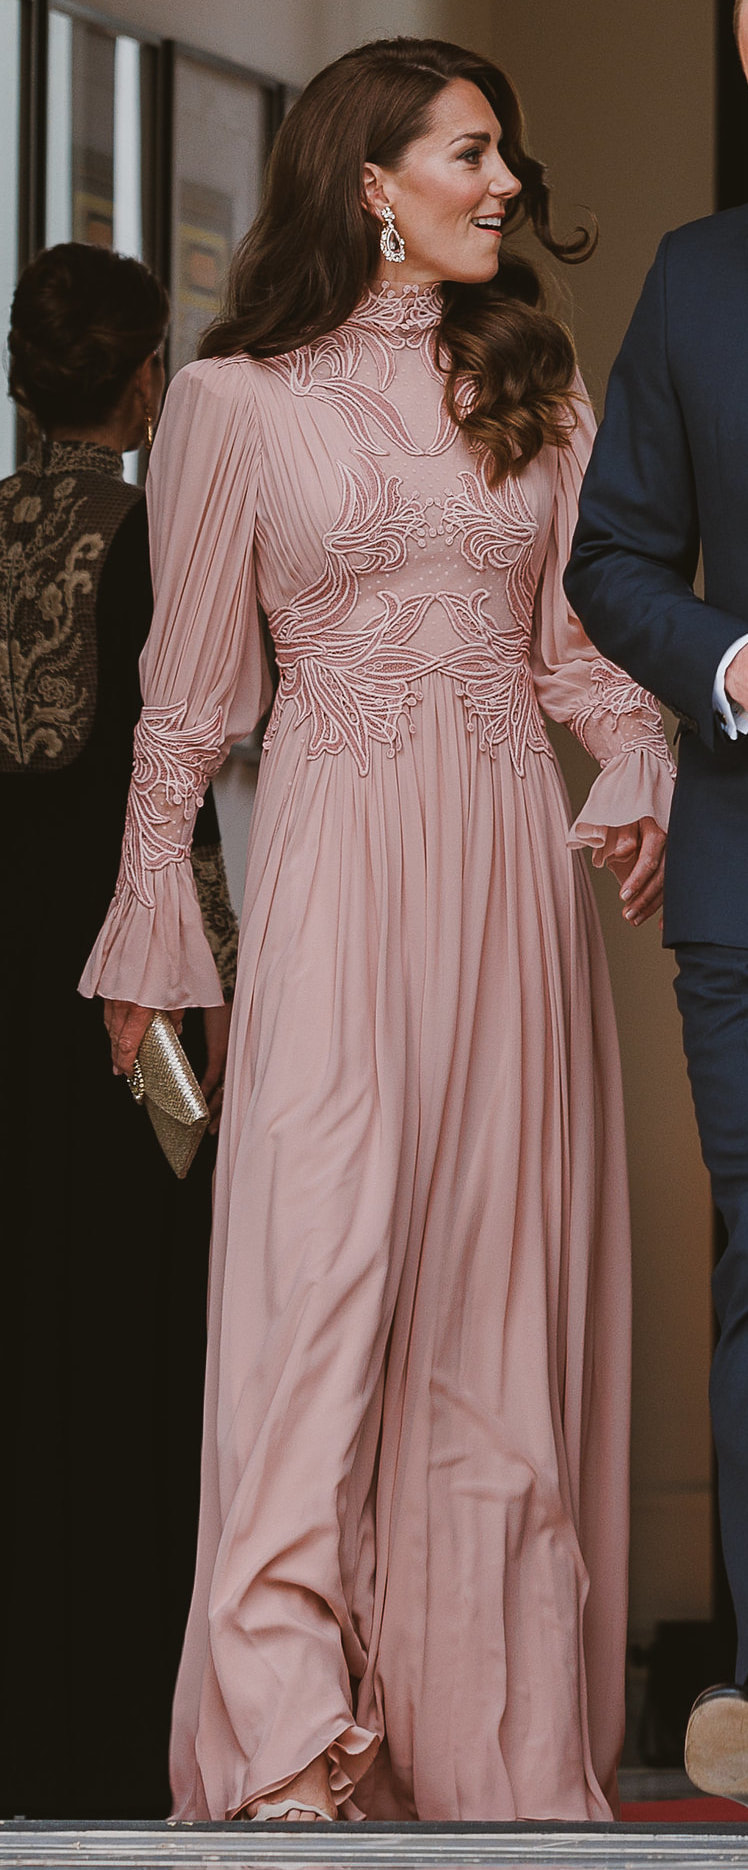 Elie Saab Embroidered Billow Gown in Dusty Pink as seen on Kate Middleton, Princess of Wales.